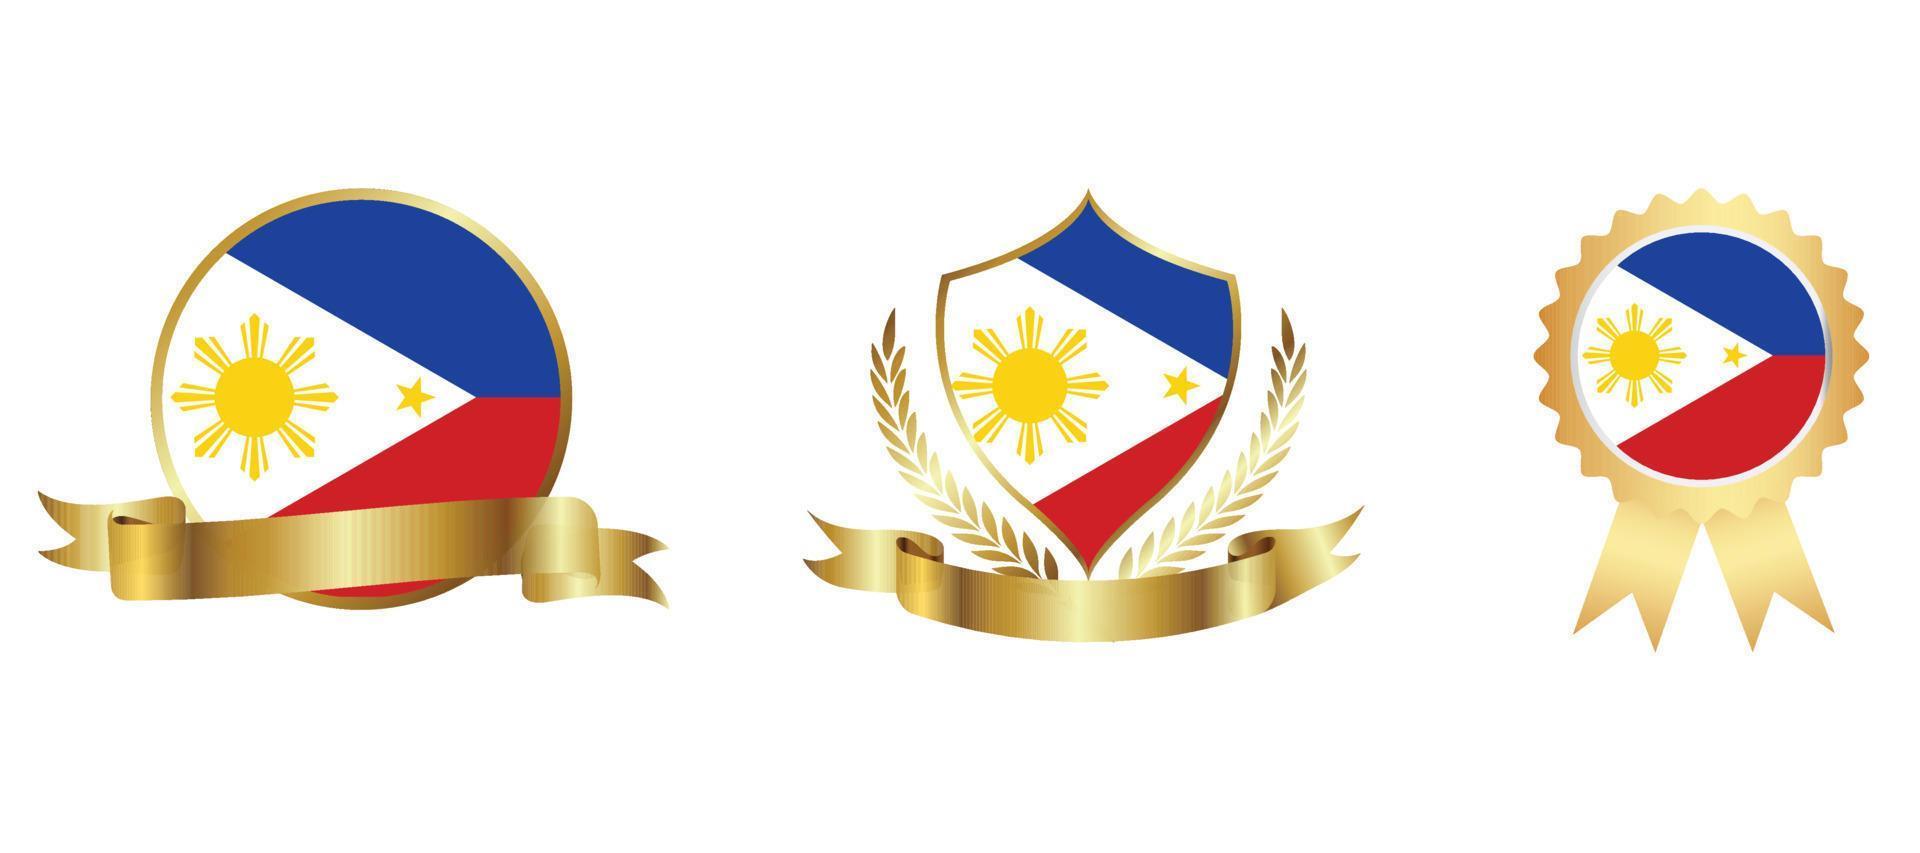 Philippines flag icon . web icon set . icons collection flat. Simple vector illustration.